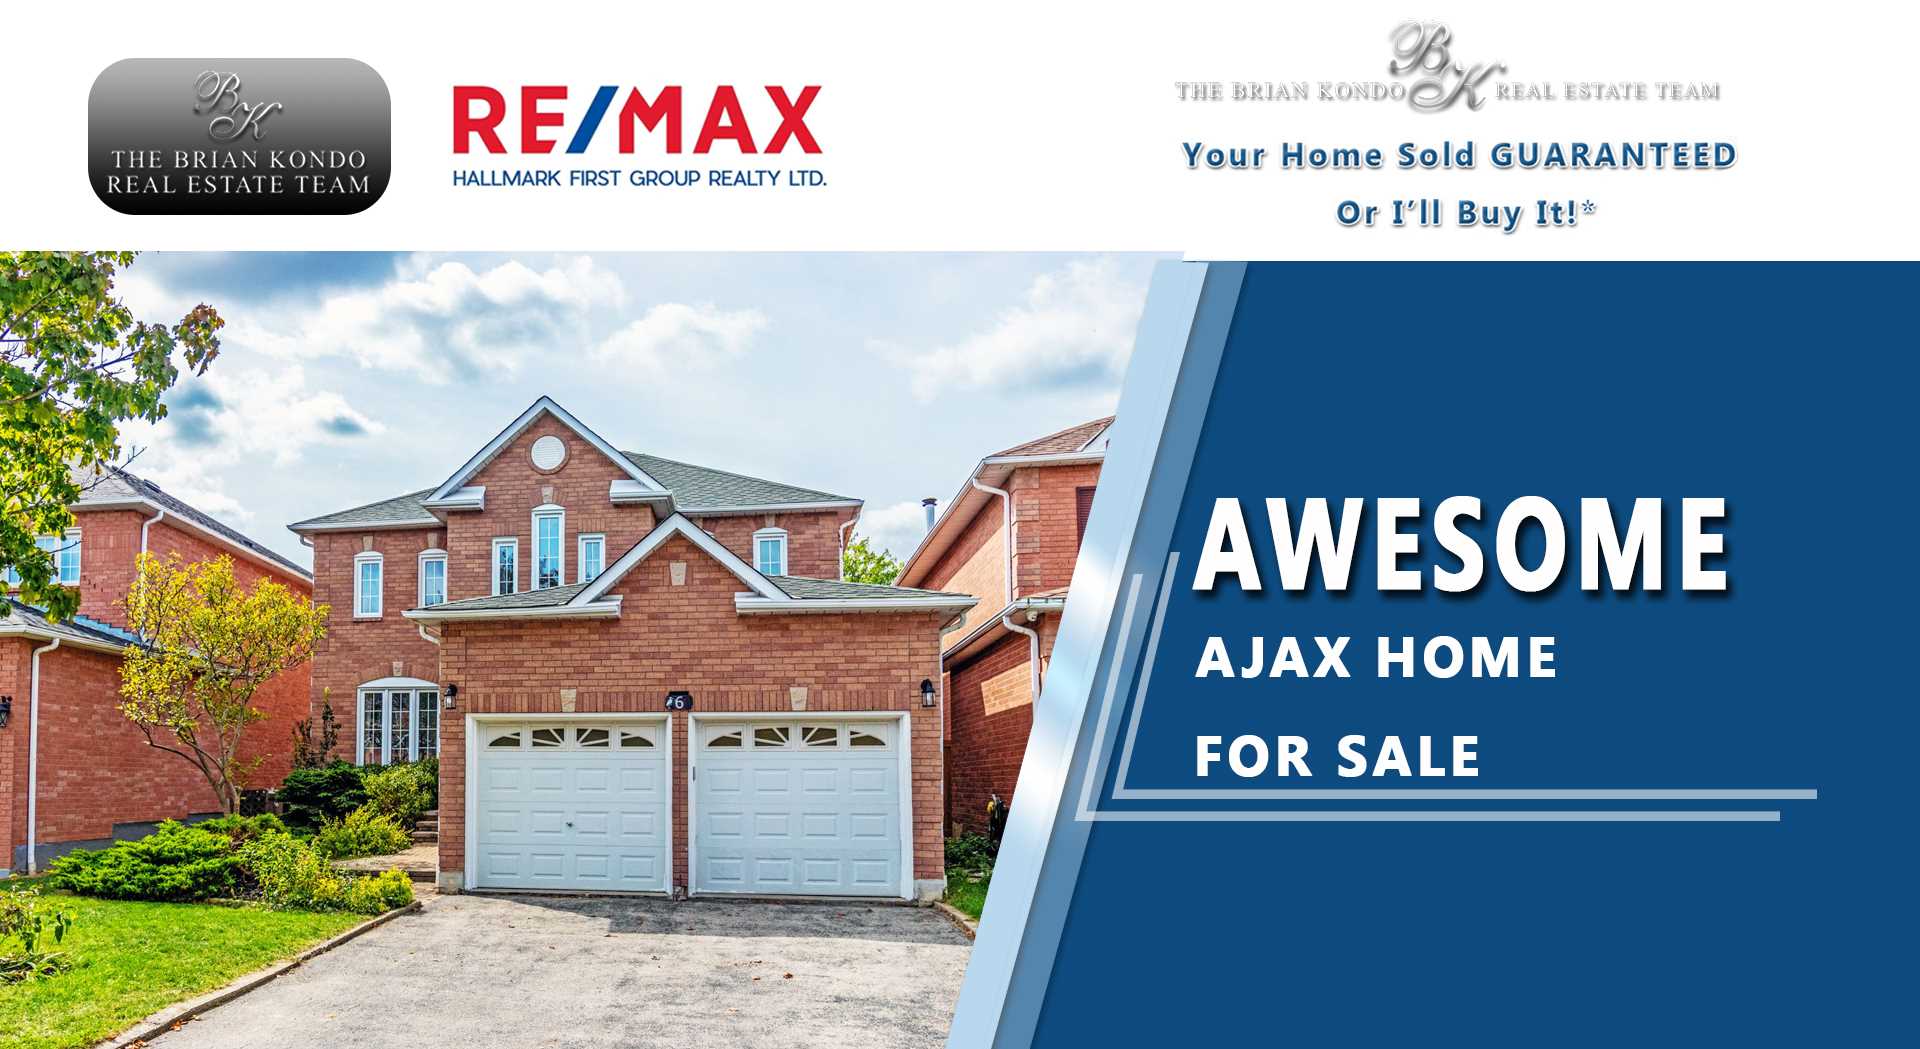 AWESOME AJAX HOME FOR SALE | The Brian Kondo Real Estate Team